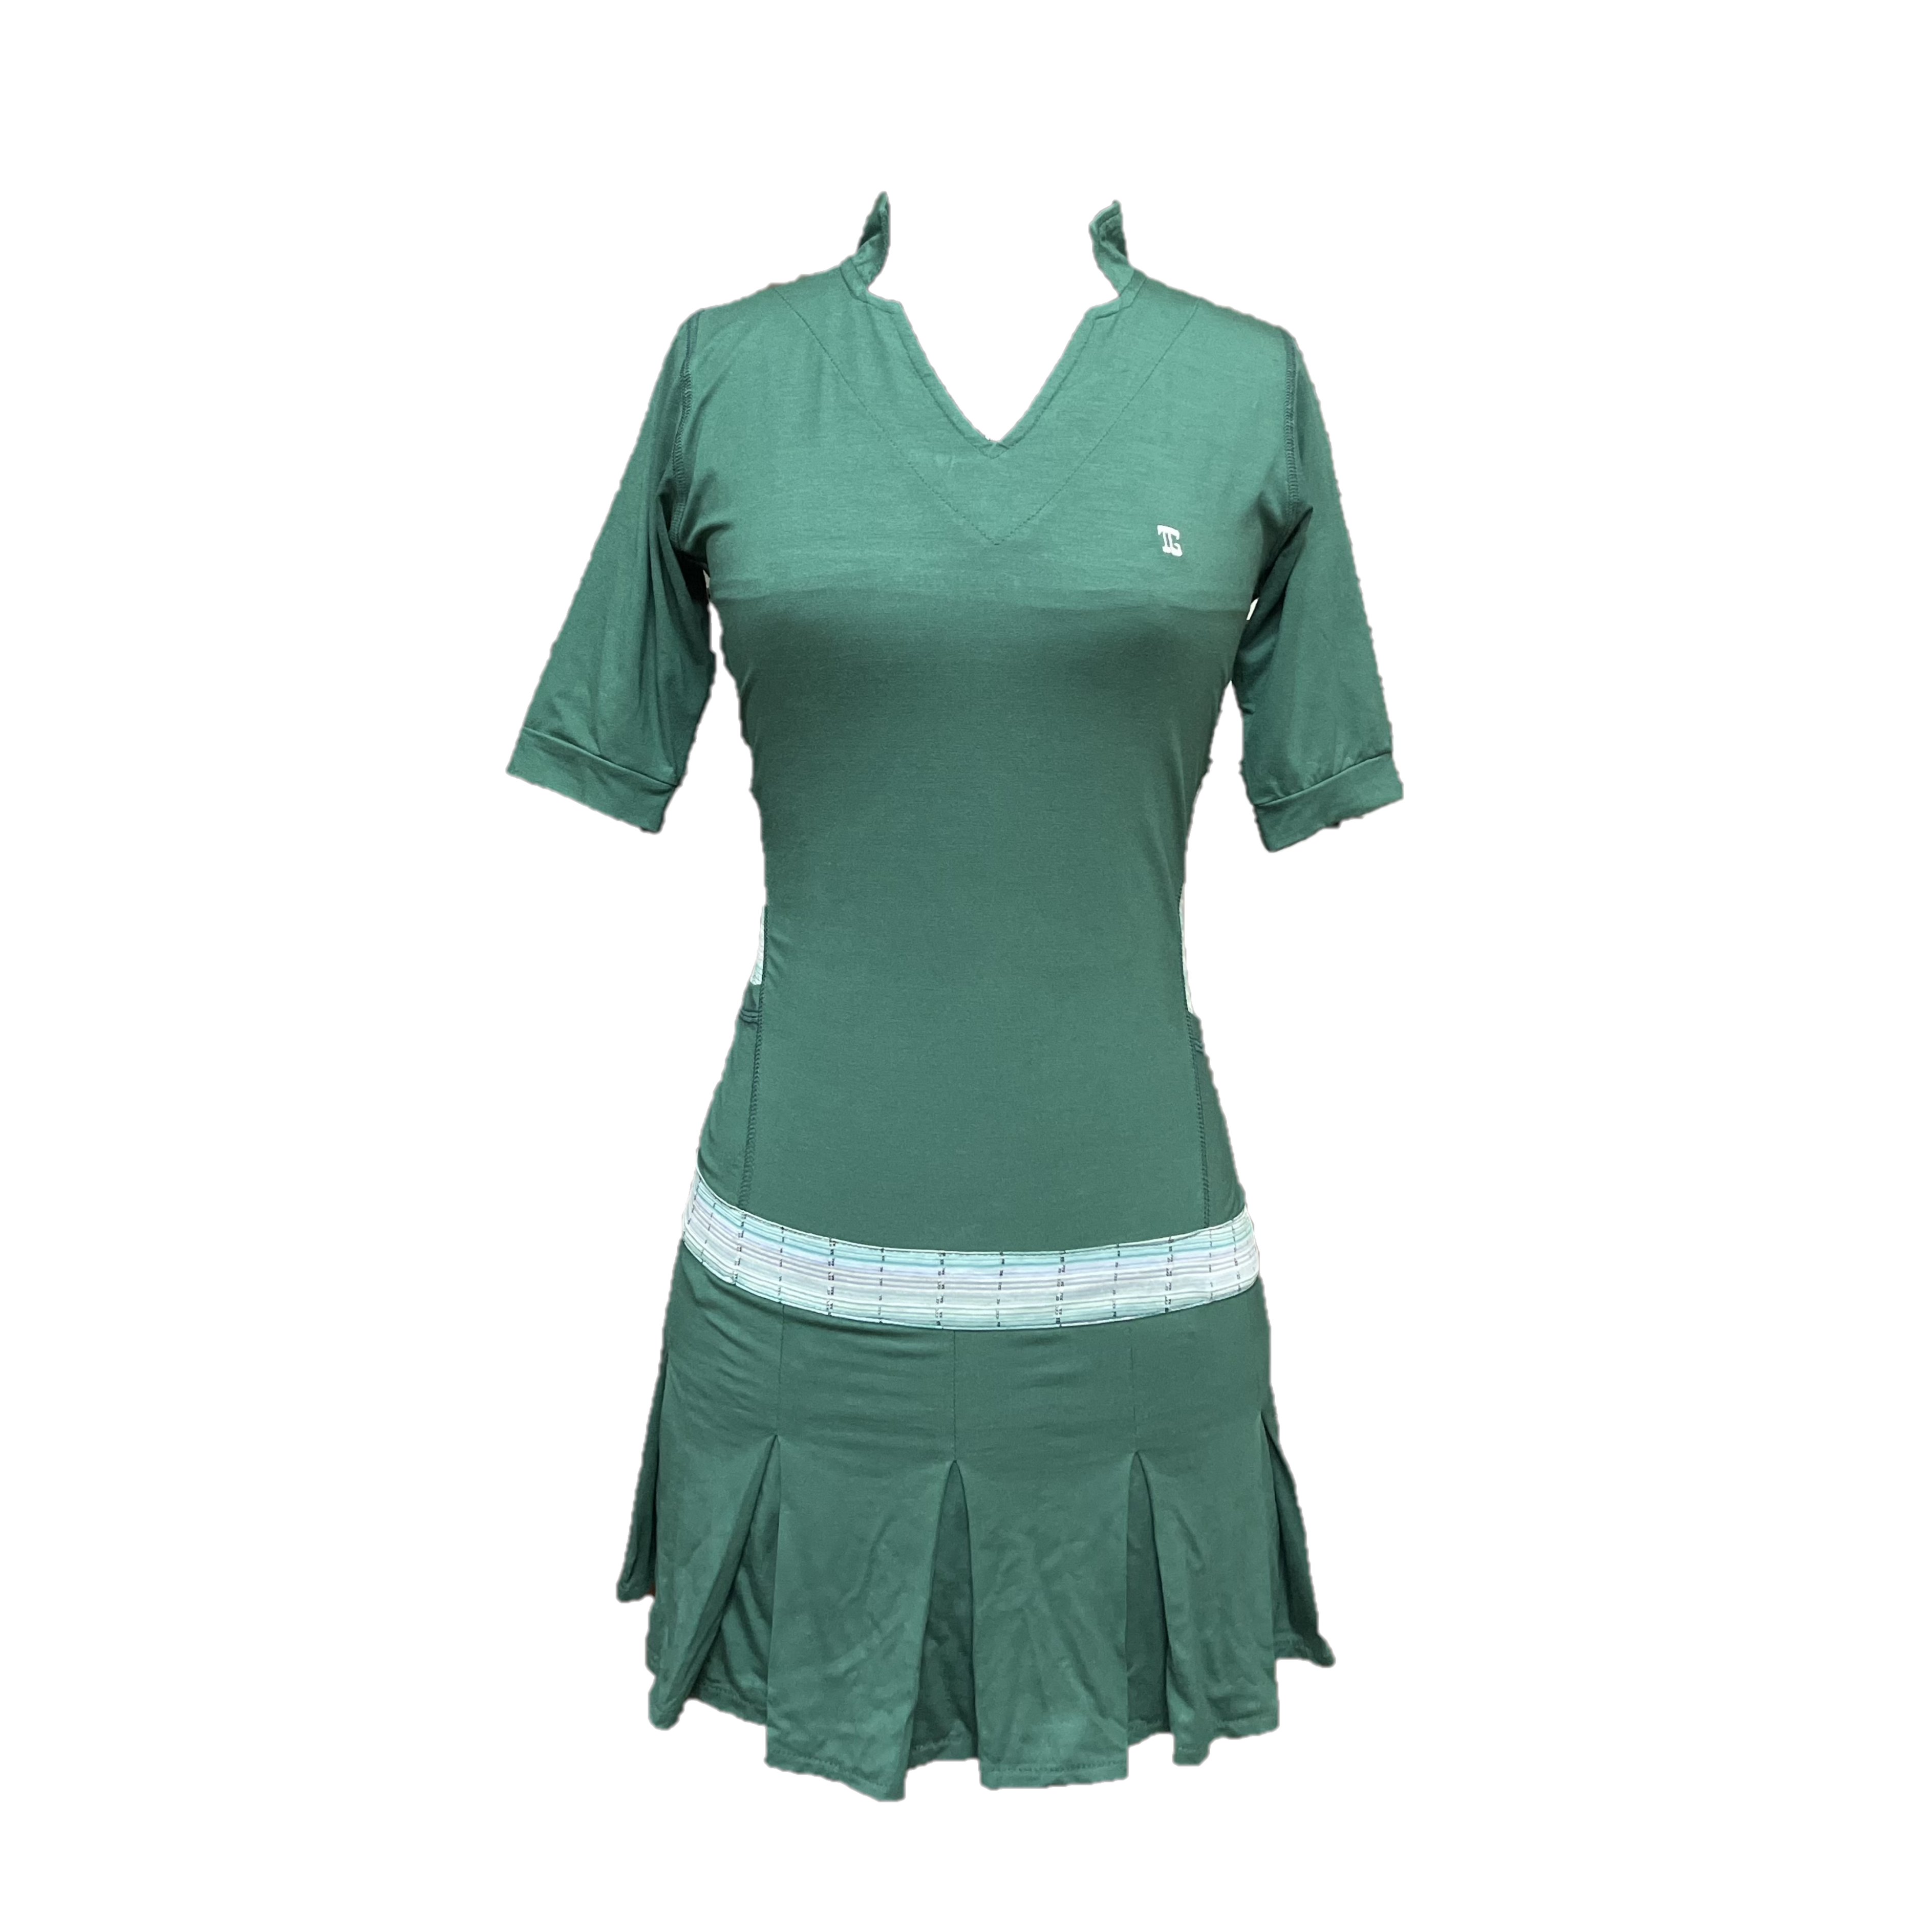 GD-017A || Golf Dress Dark Green, Open V Neck Mandarin Collar Pleated Swing Hem with White and Green Fine striped Motif Breathable Underarm and Above Hemline Trim Panels, 2 Side Pockets Mid Length Short Sleeves